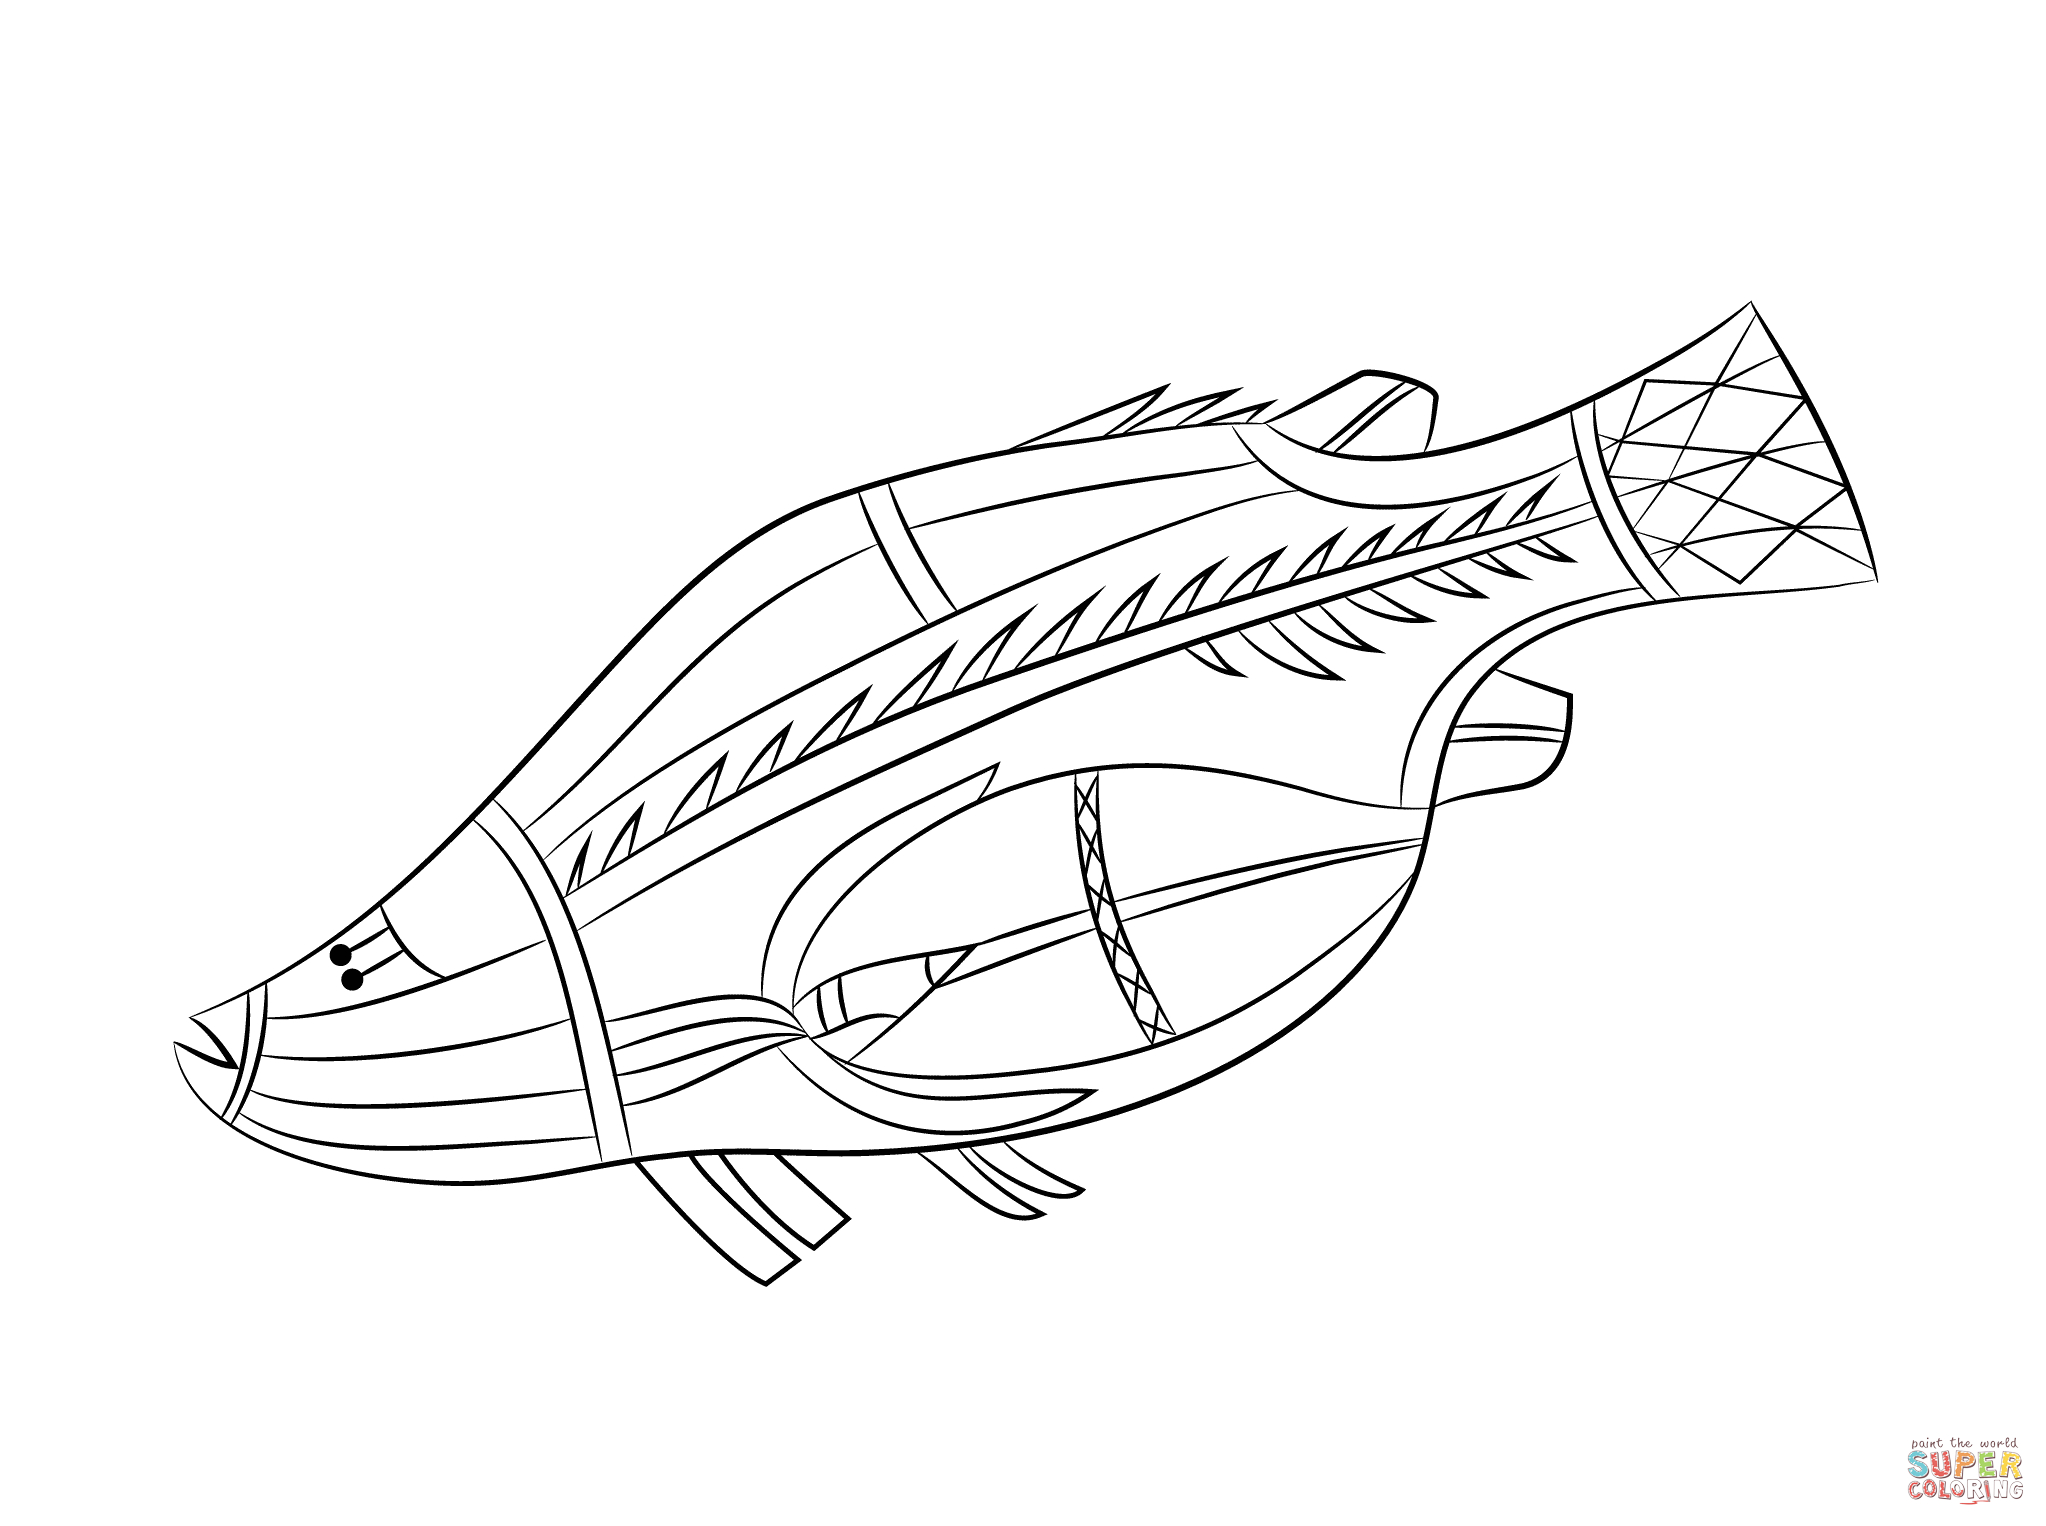 Aboriginal Art Coloring Pages | Free Coloring Pages - Free Printable Aboriginal Colouring Pages